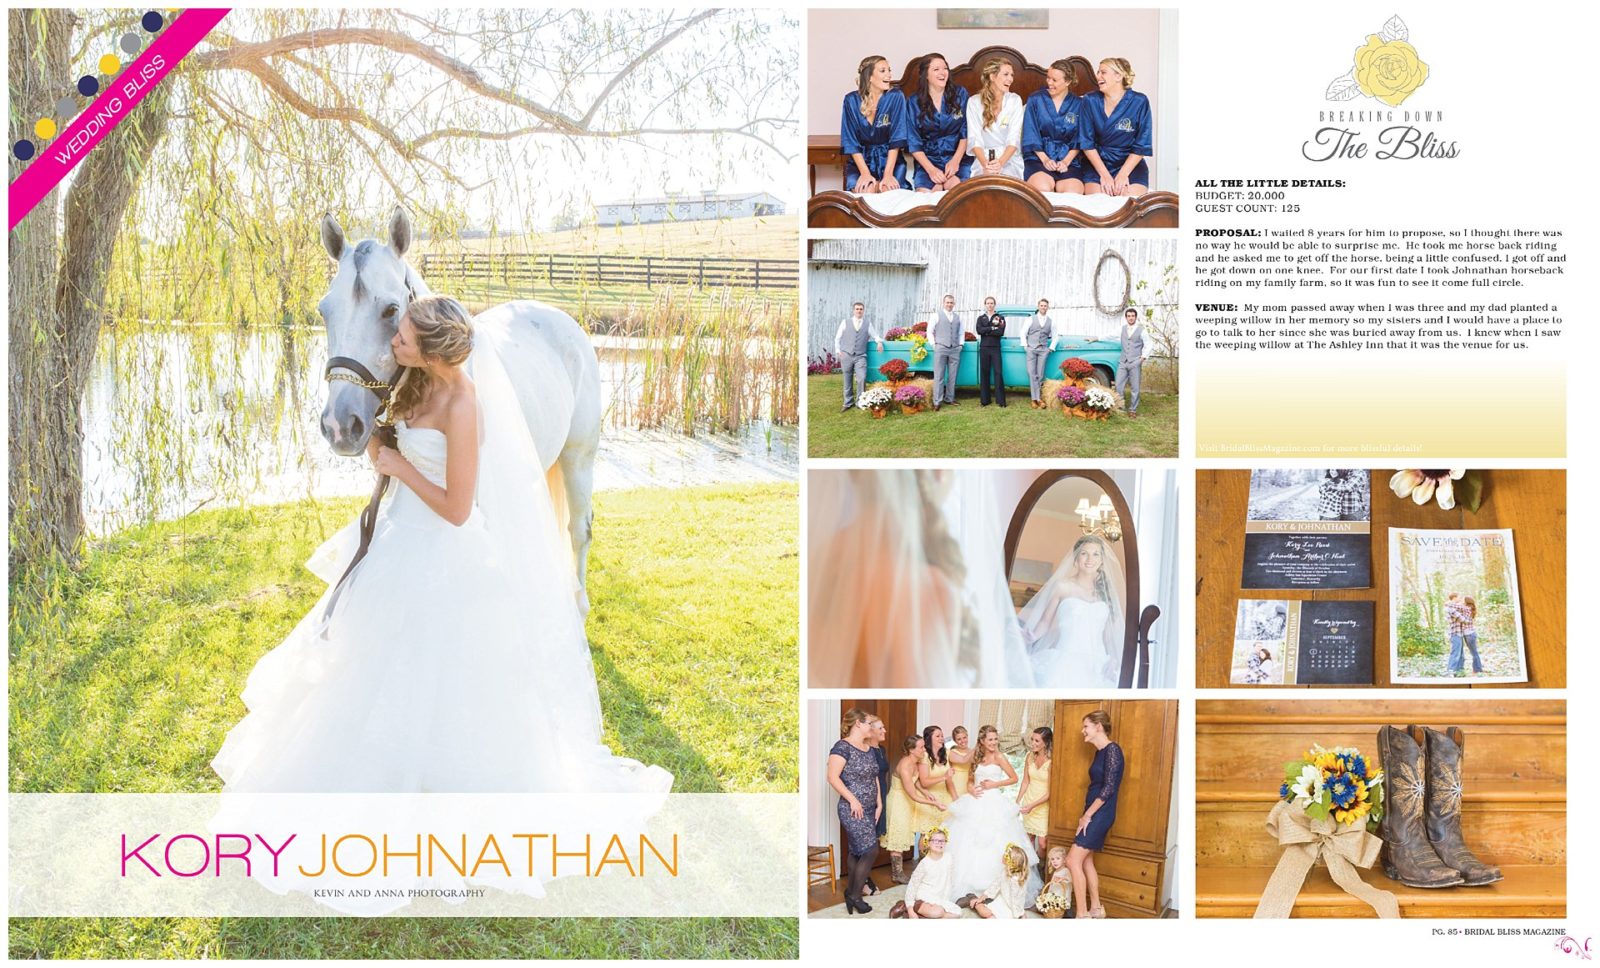 Kory and Johnathan's wedding at the Ashley Inn in Lancaster, KY featured in Bridal Bliss Magazine a wedding resource for Central Kentucky Couples.